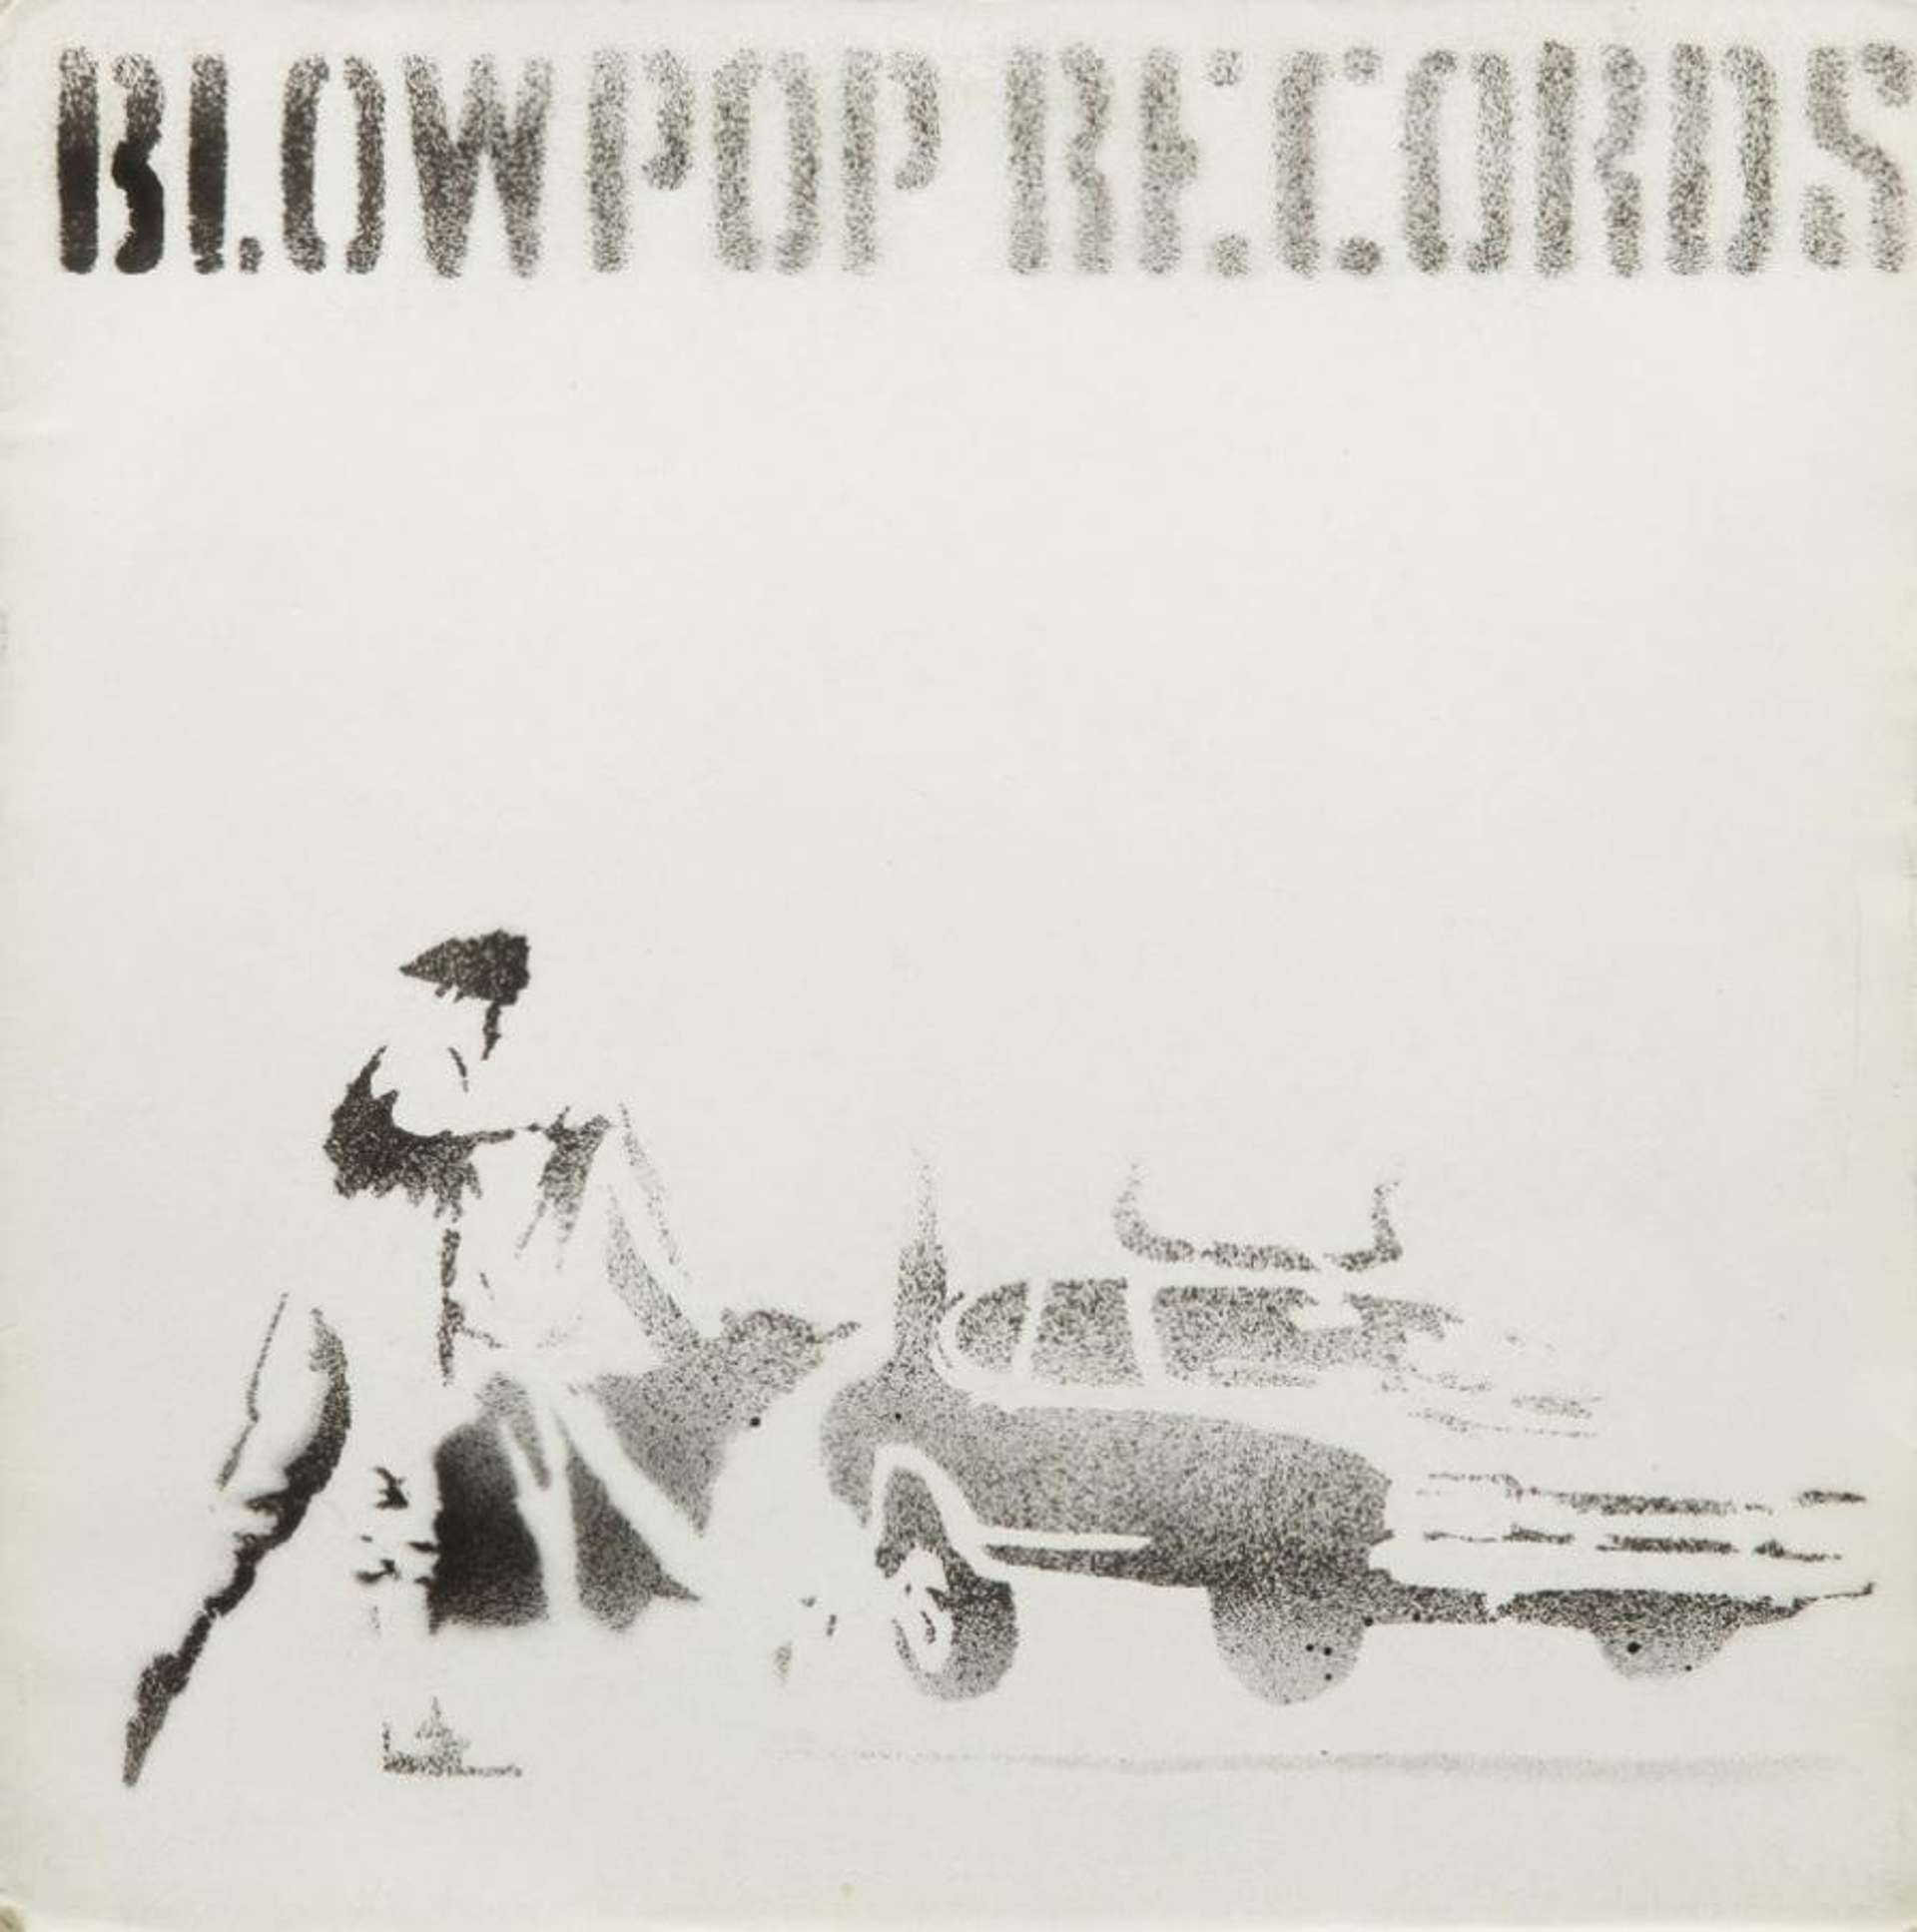 Banksy: Blowpop Records - Unsigned Spray Paint